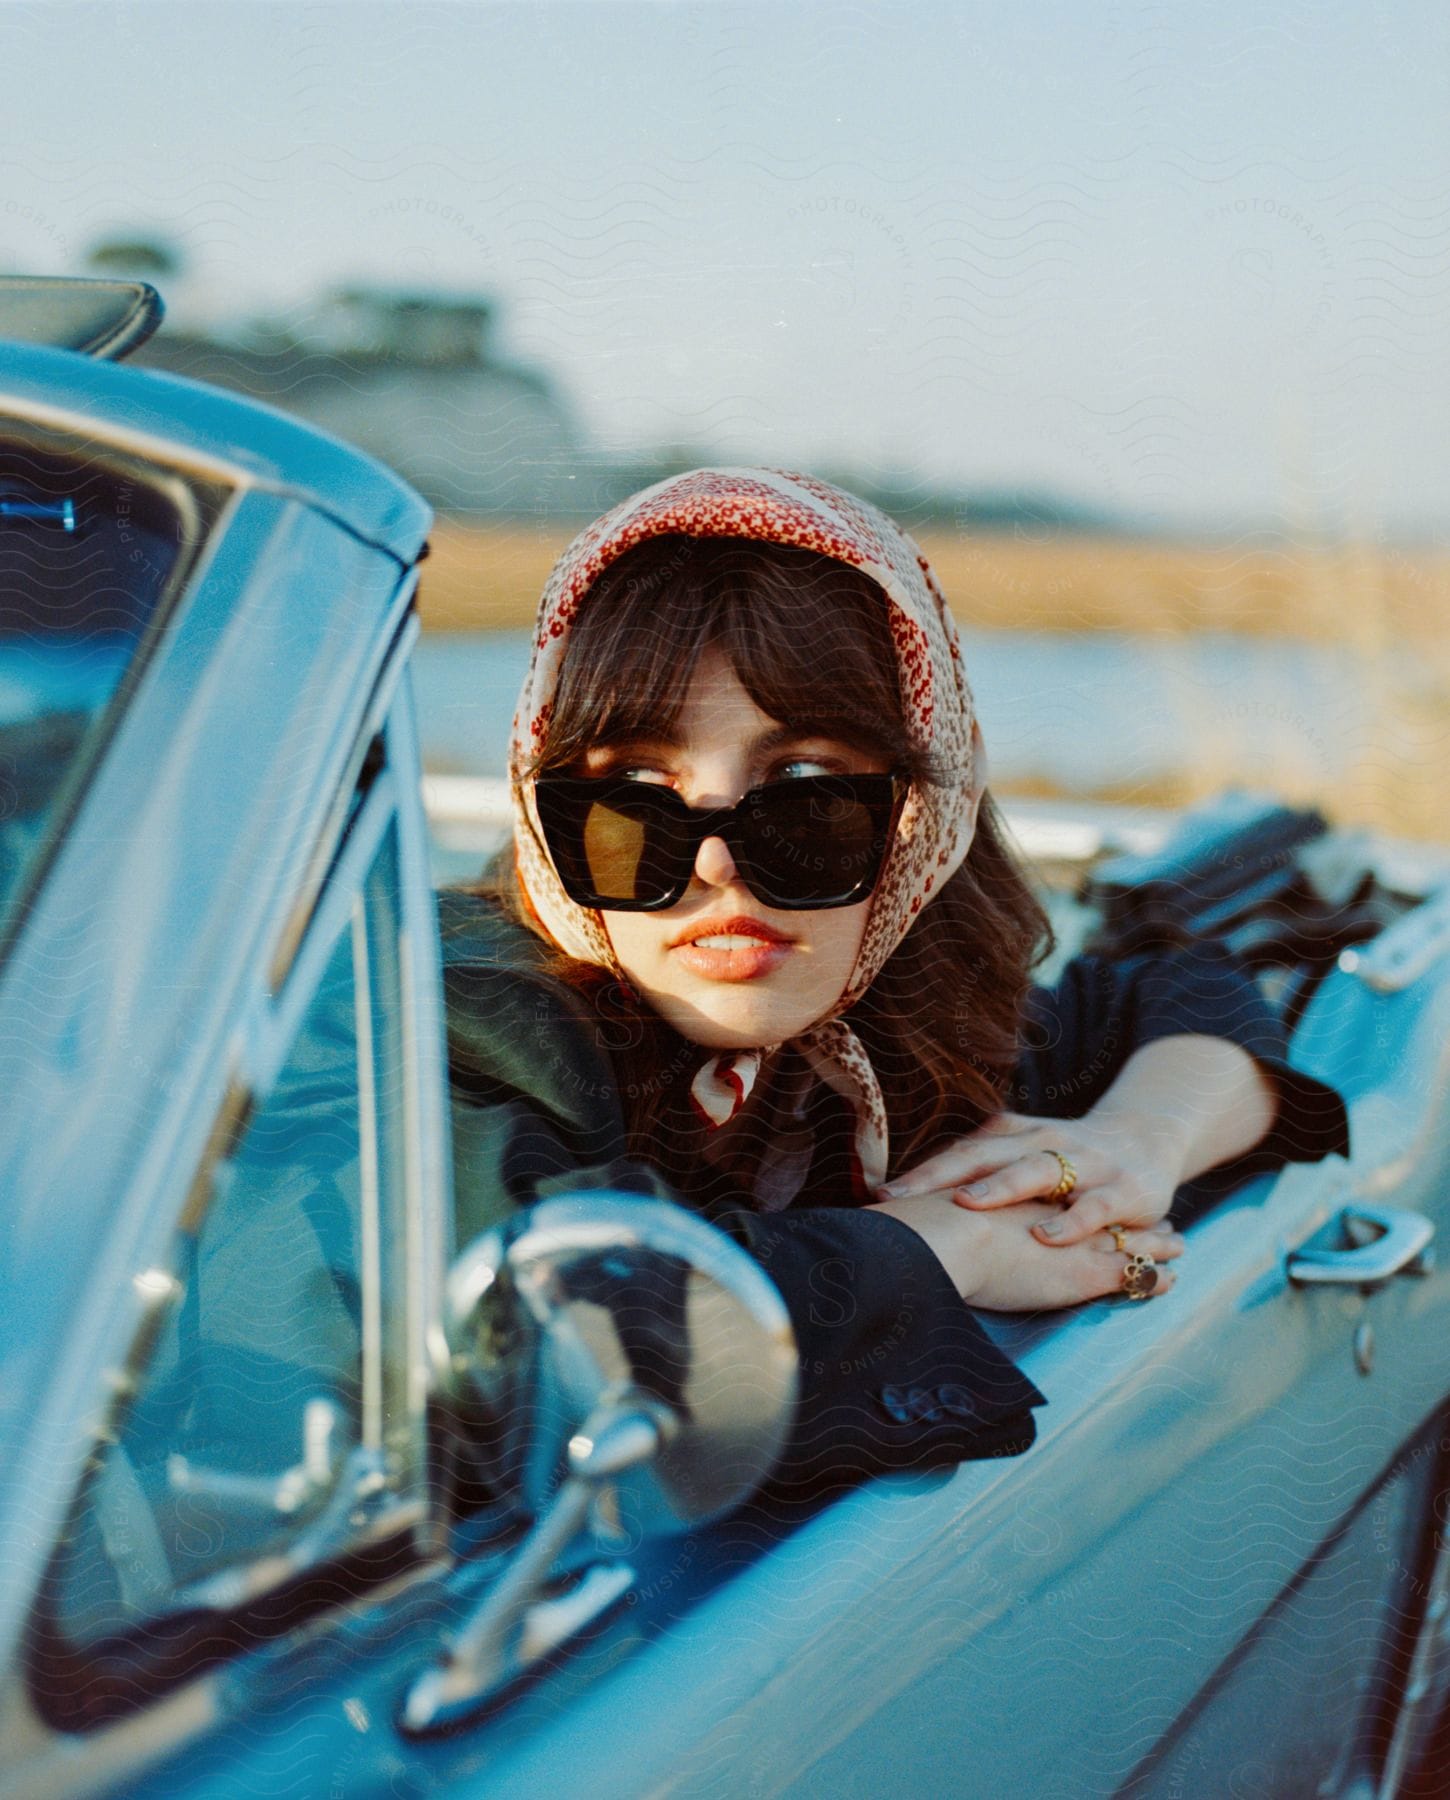 A woman in sunglasses leans out of a blue convertible